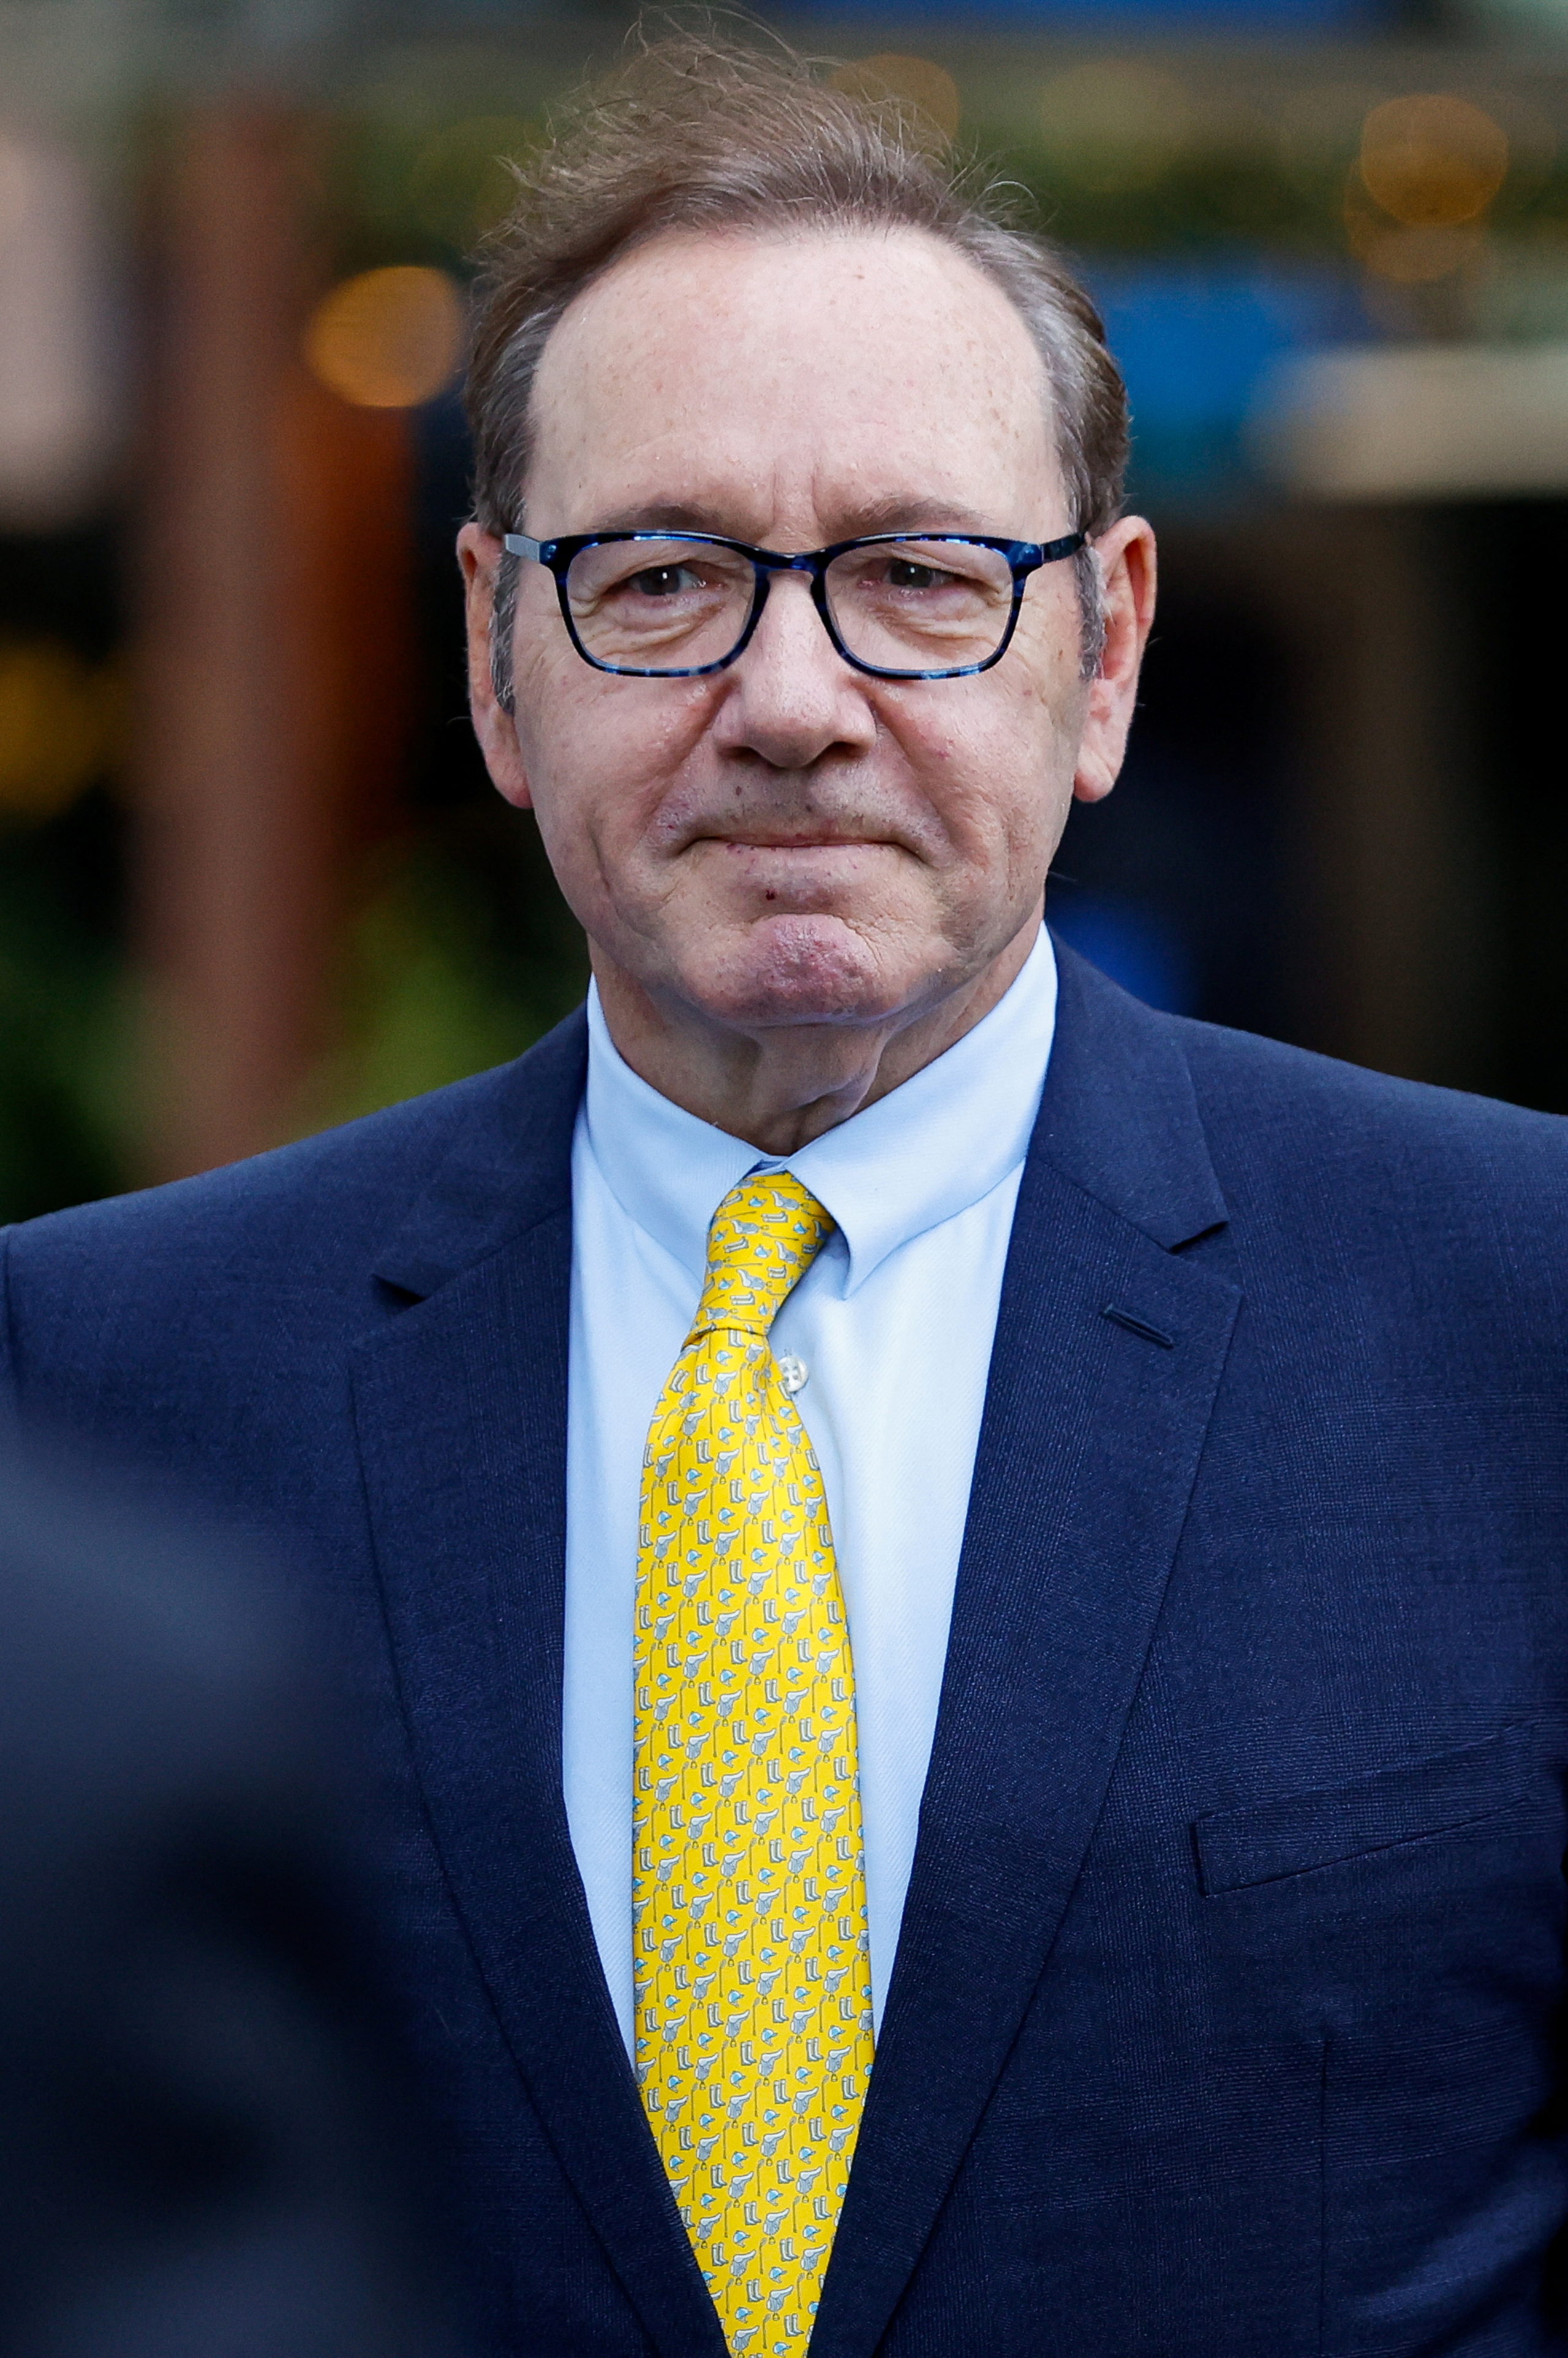 Actor Kevin Spacey walks outside Southwark Crown Court, as his trial over charges related to allegations of sex offences draws to a close, in London, Britain, July 25, 2023. REUTERS/Peter Cziborra